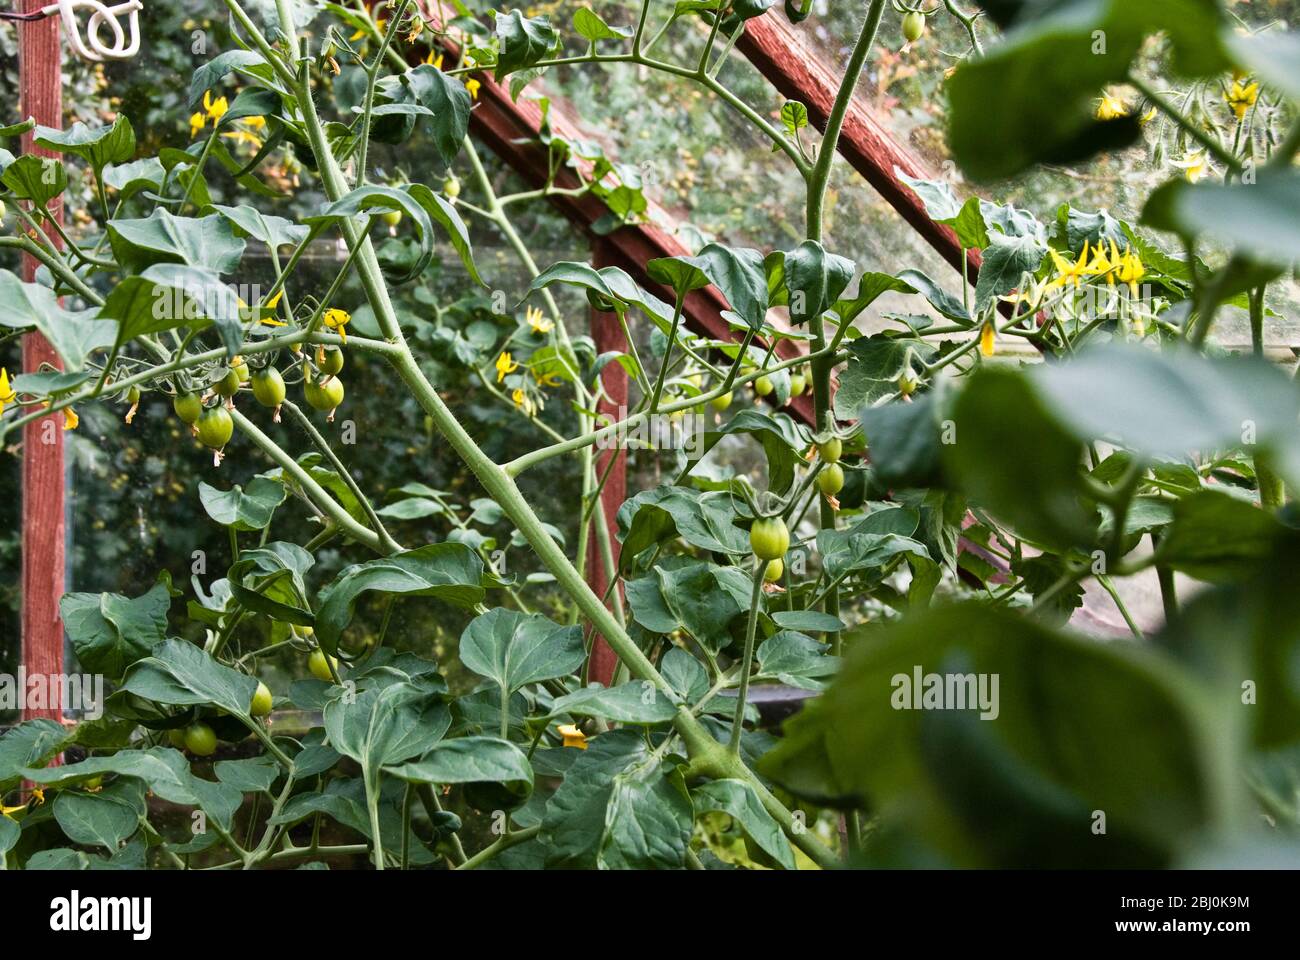 Tomatoes growing in greenhouse - Stock Photo